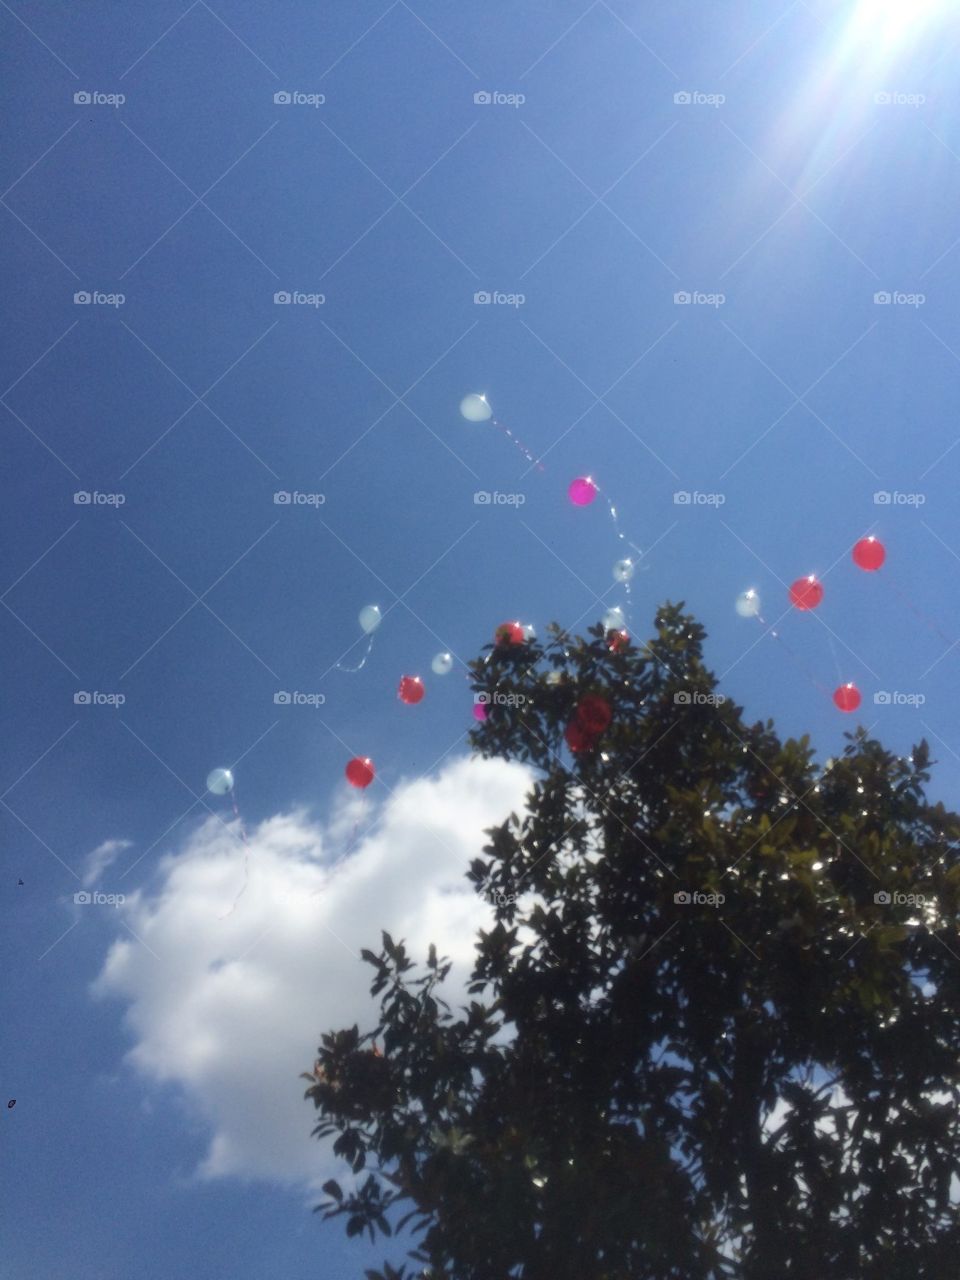 balloons at funeral . These are the balloons we released at my grandfathers funeral. 